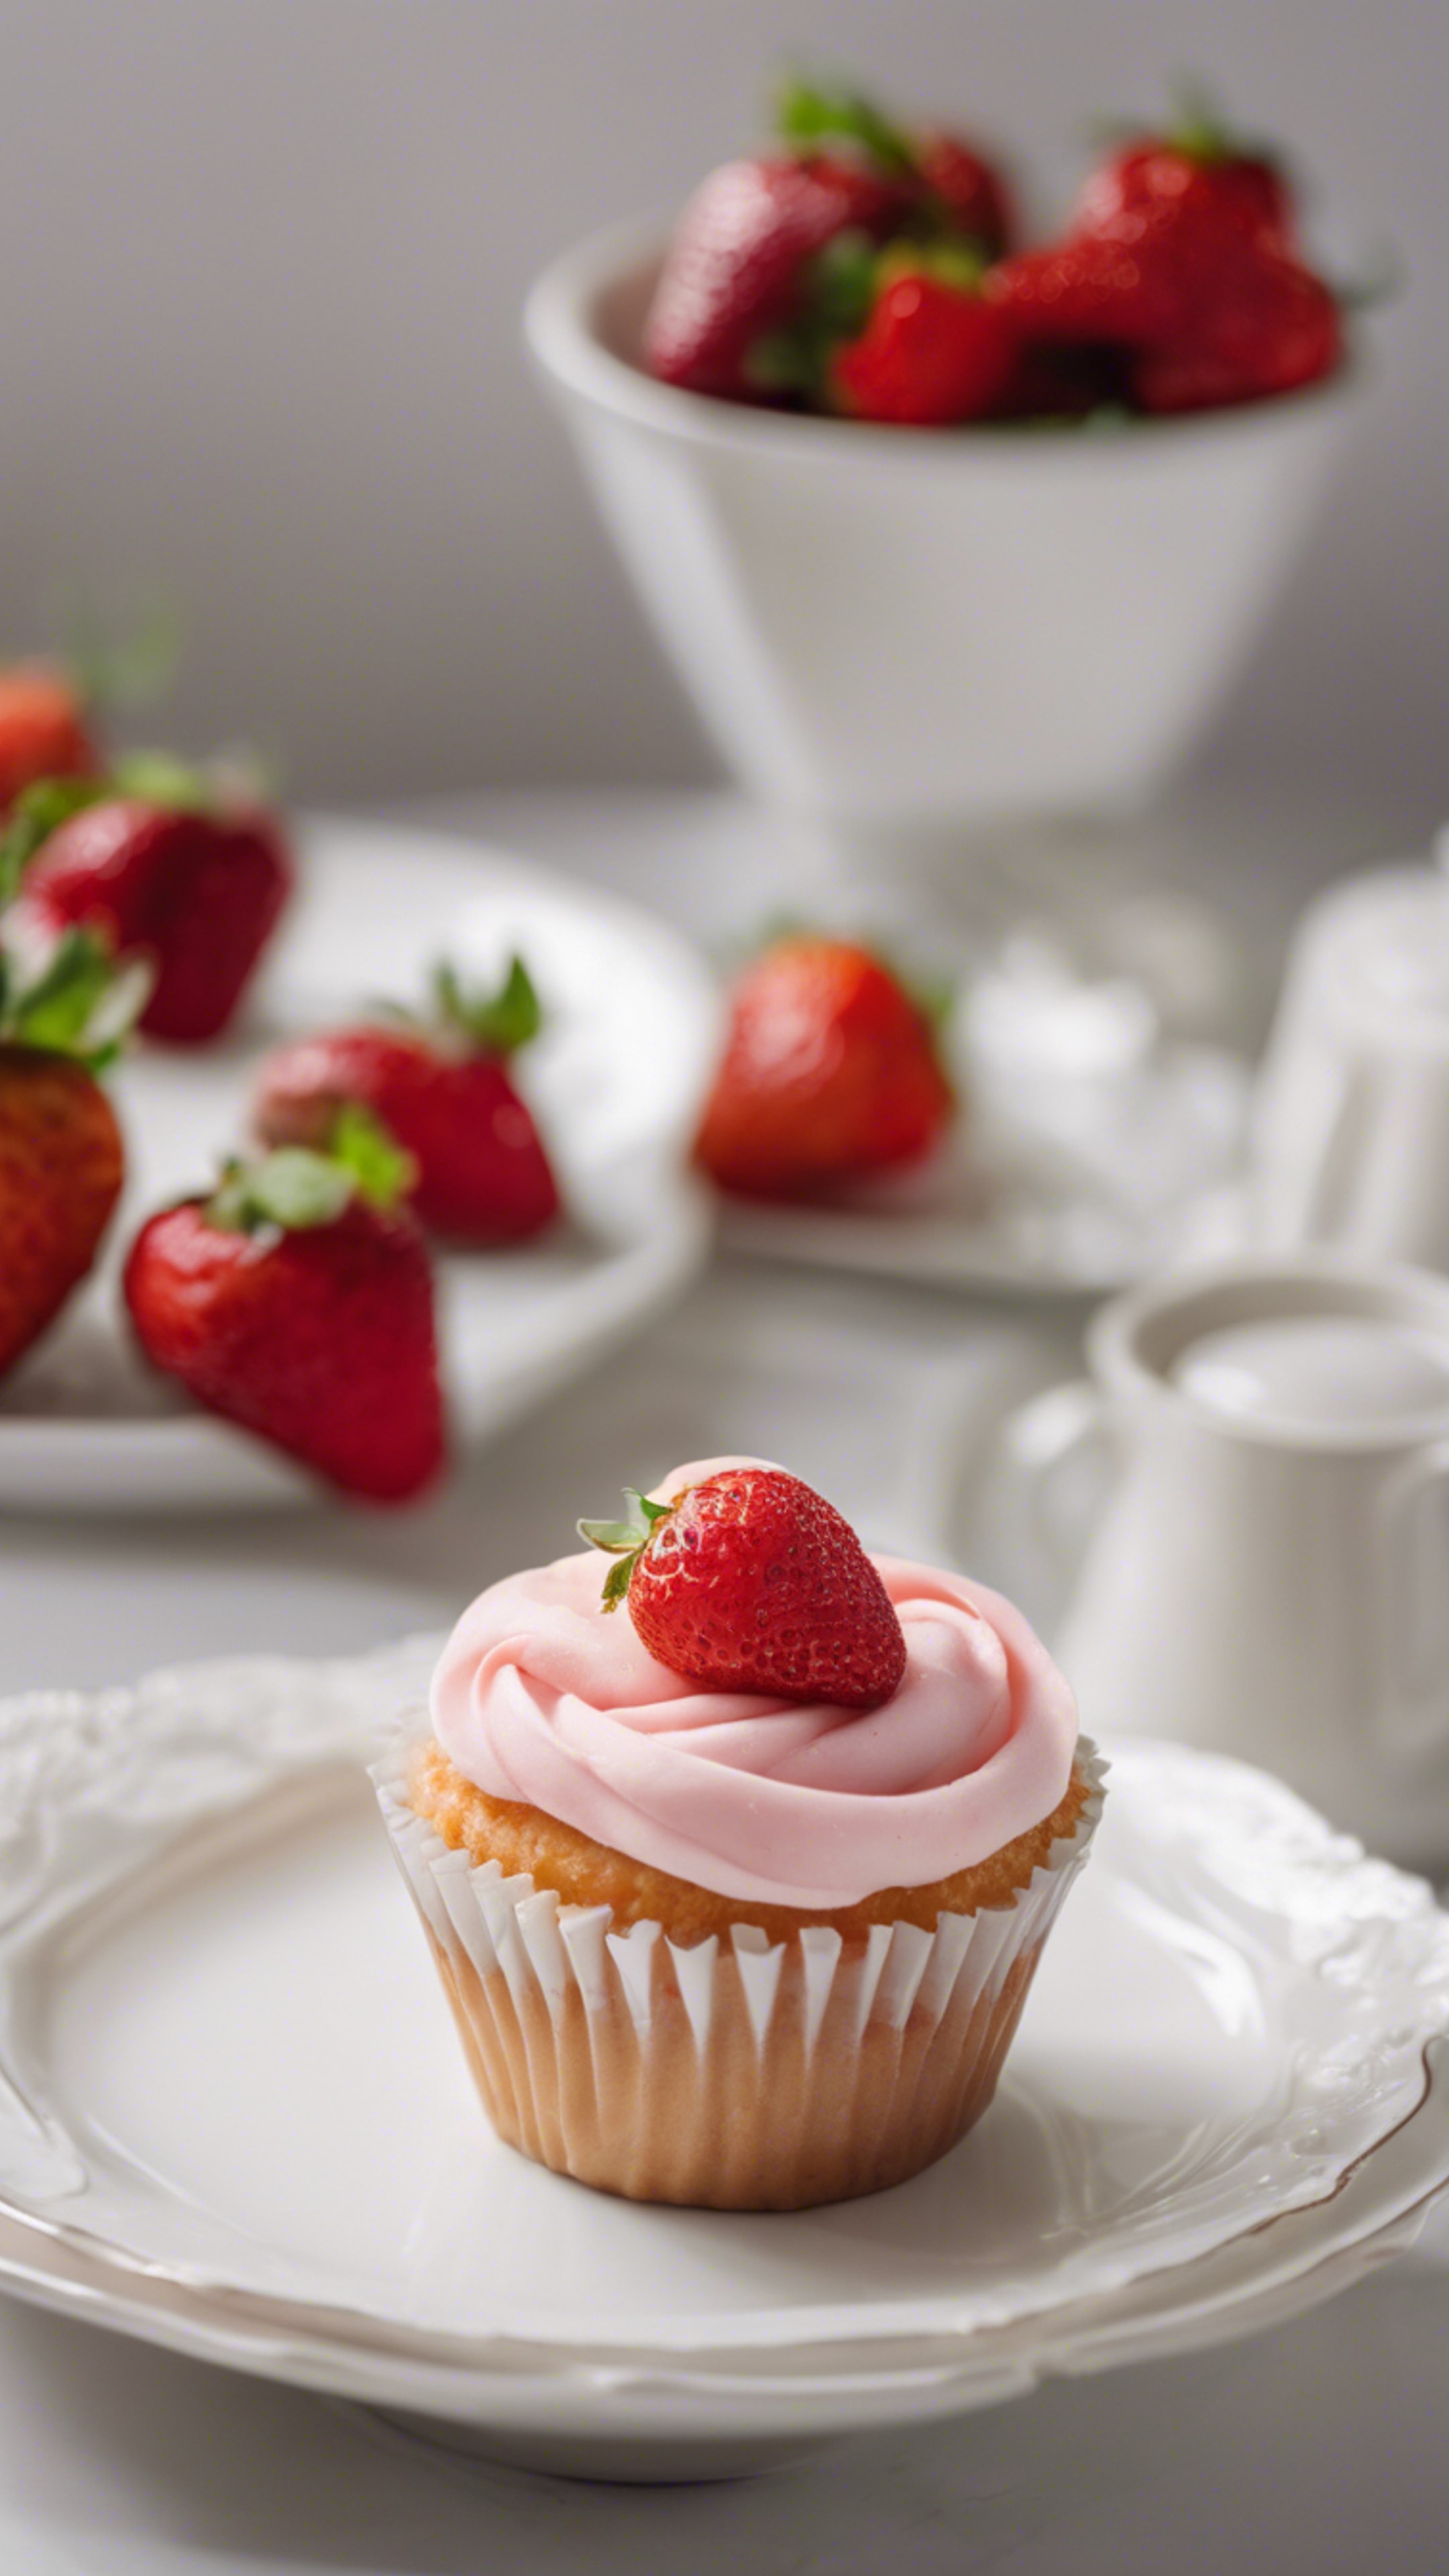 A single strawberry cupcake on a white porcelain plate in bright daylight. Тапет[ddcb3576222e4604b5c8]